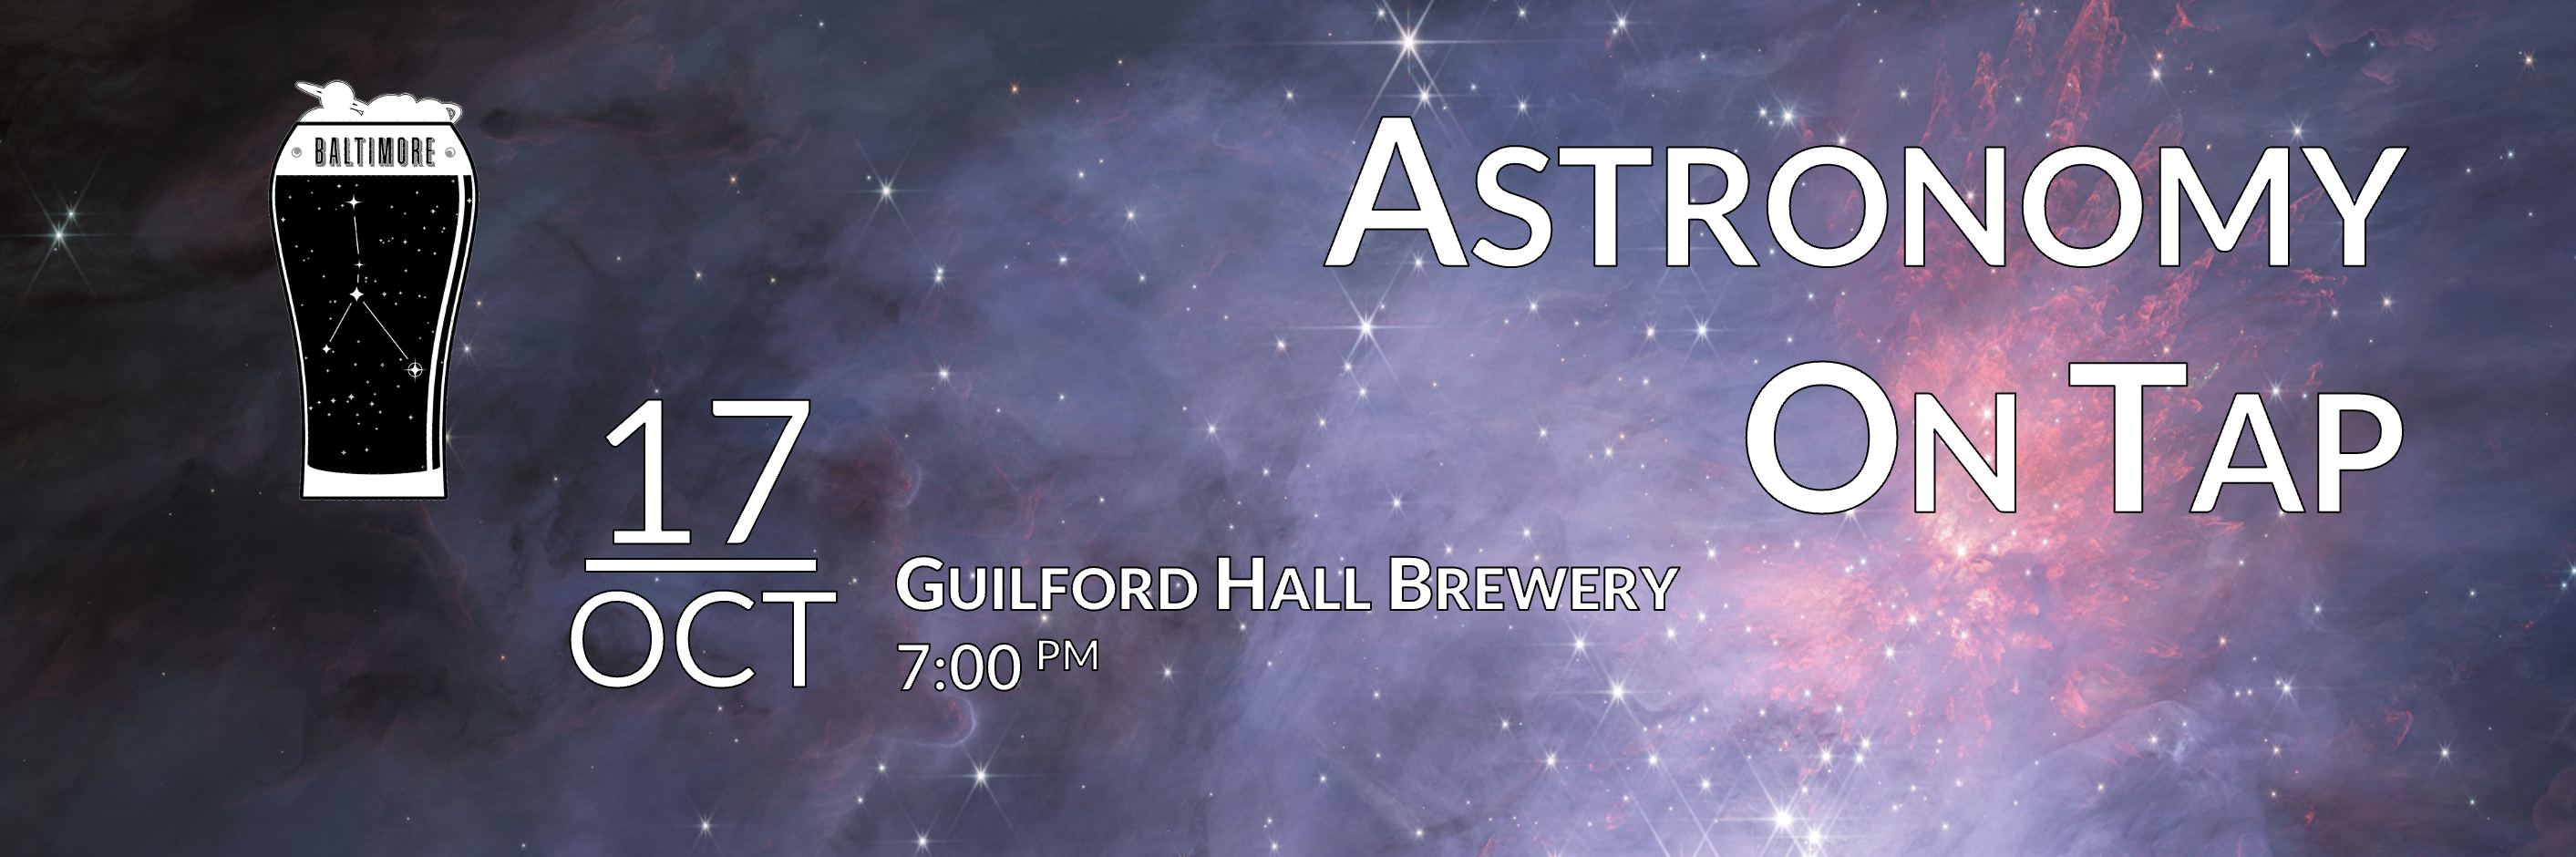 AoT Baltimore - October 17th at Guilford Hall Brewery